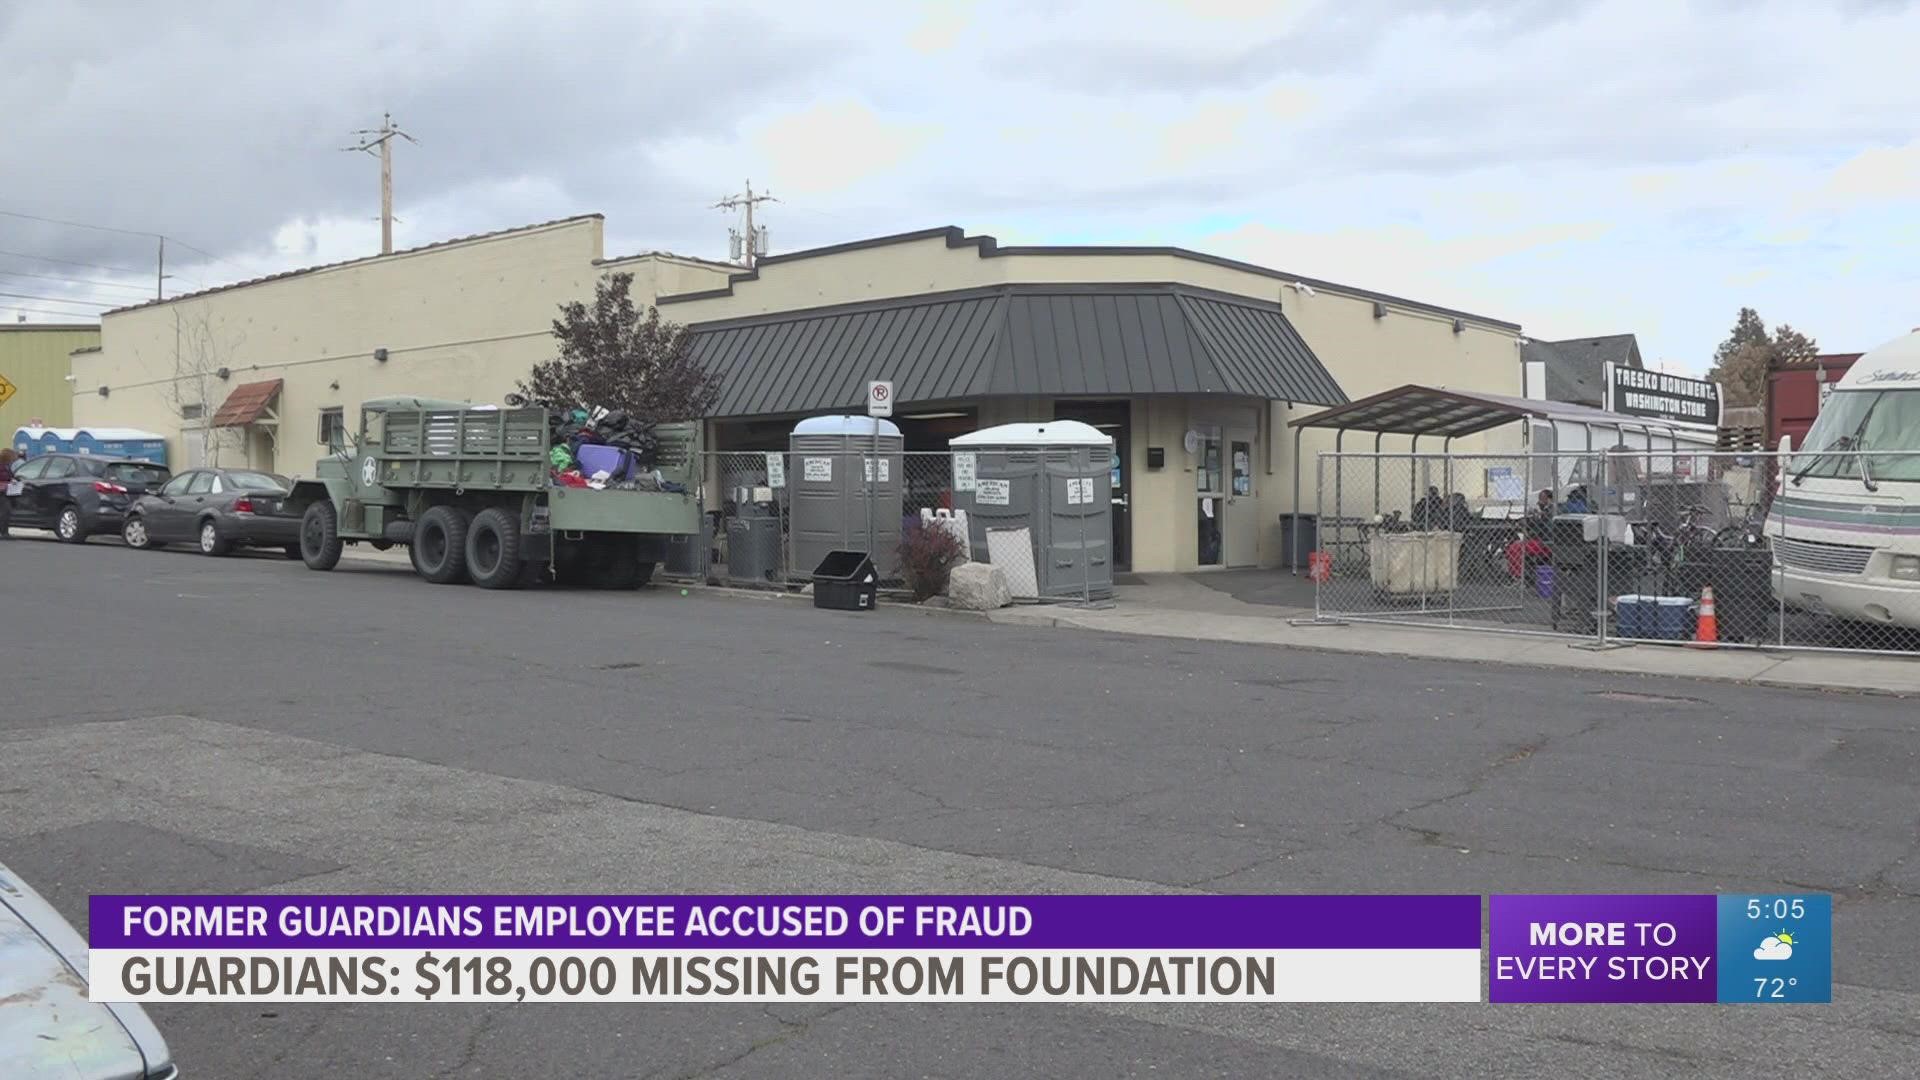 The CEO of the Guardians Foundation Mike Shaw reported missing funds after studying accounts.